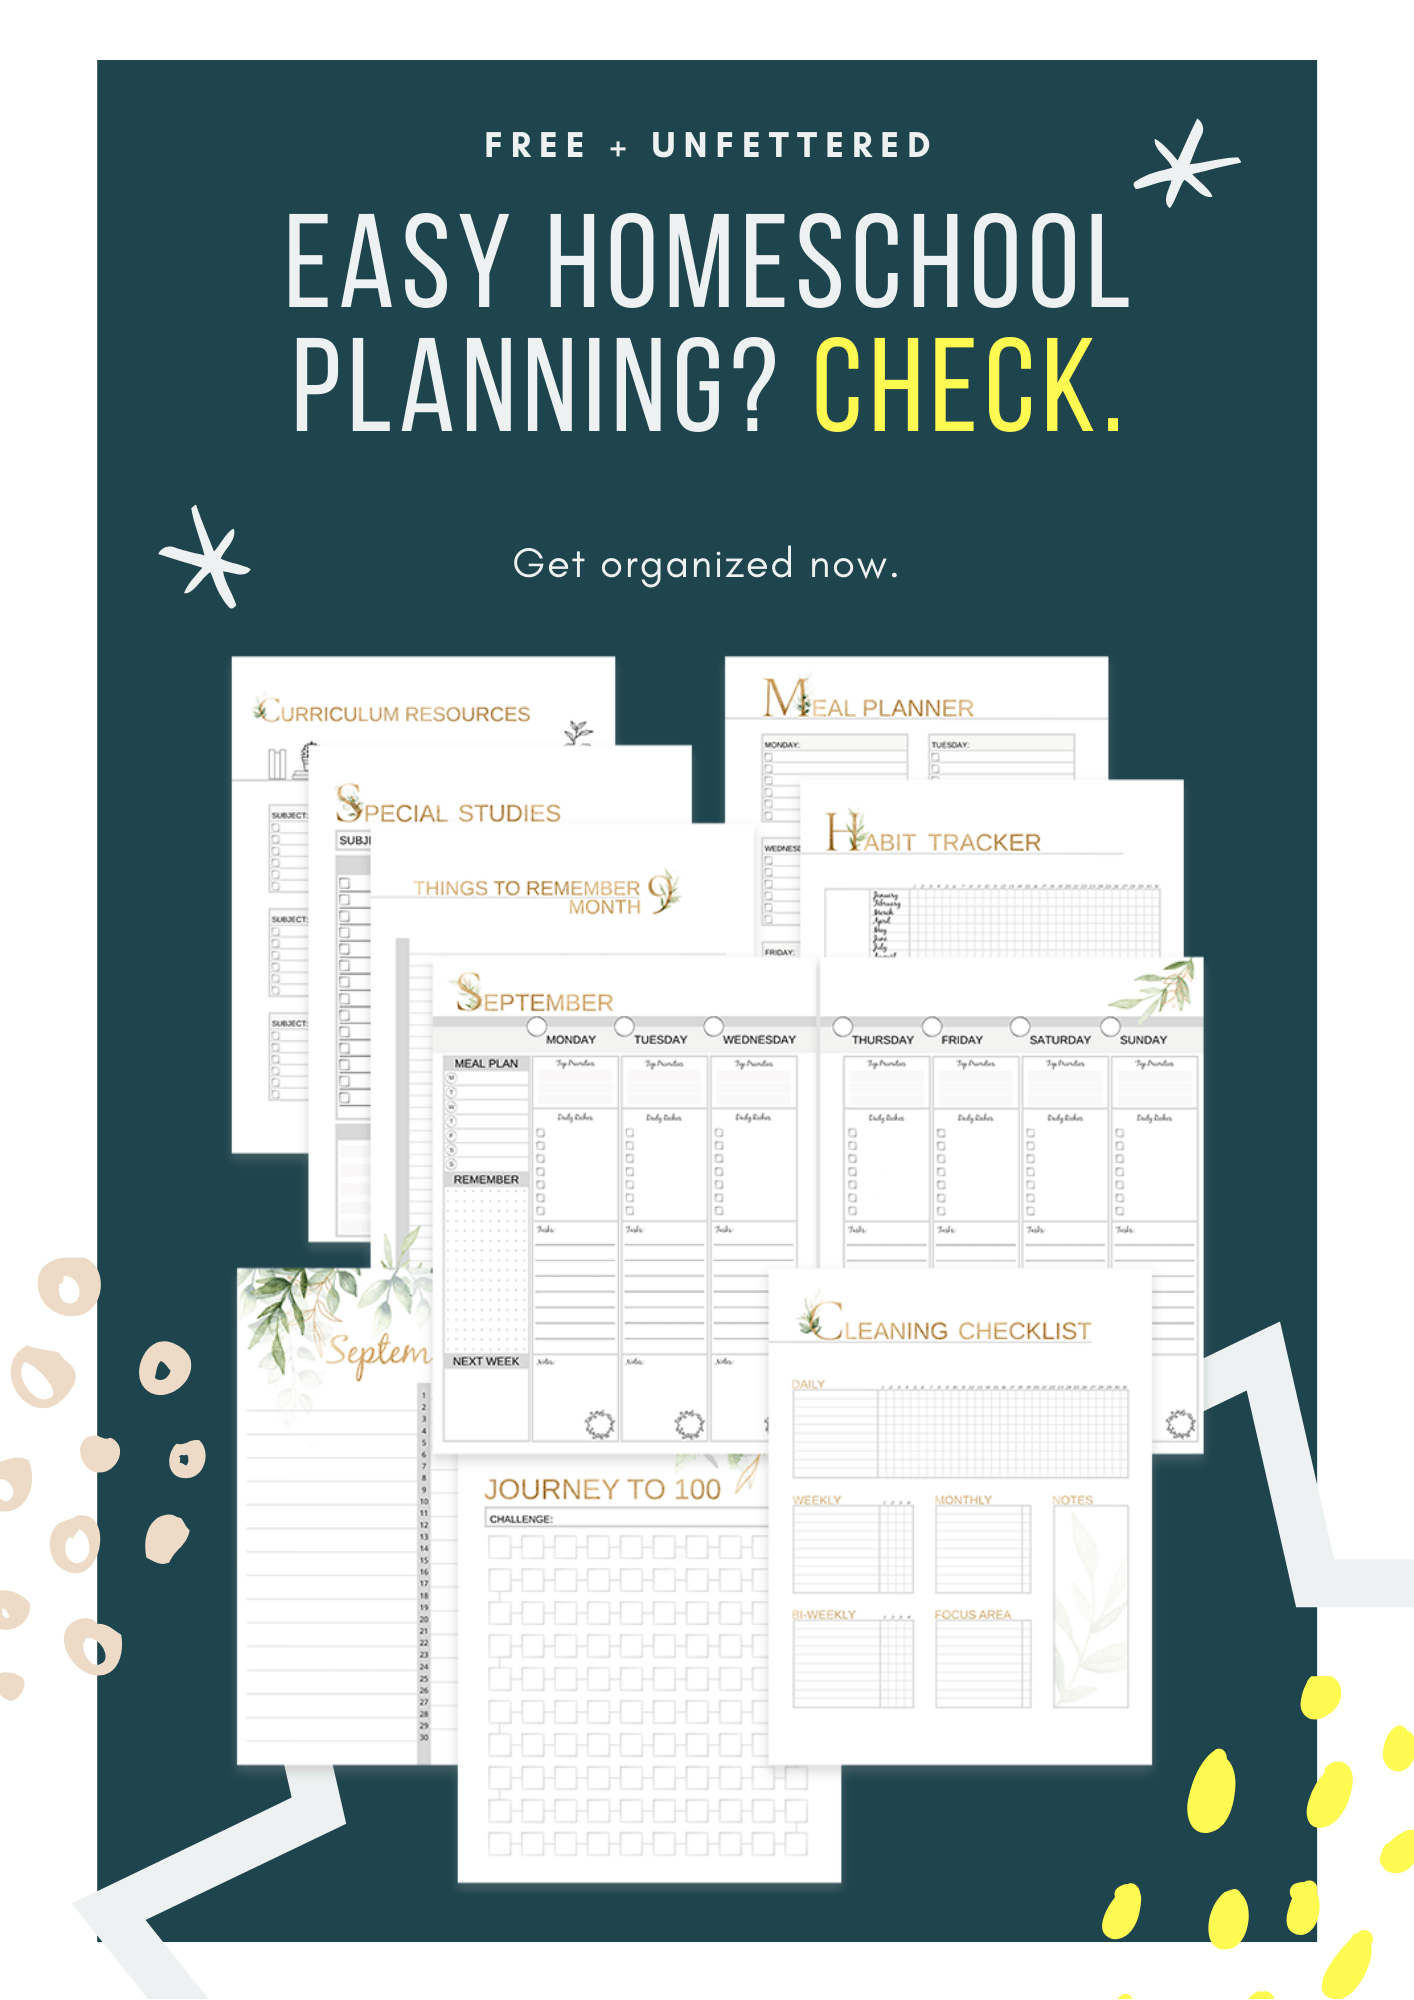 Homeschool planning and recordkeeping doesn’t have to be nearly as complicated or as stressful as it may seem — even if you’re new to this whole organization thing. There's an easier way to plan your days. The printable All-in-One Homeschool Planning and Recordkeeping Binder is a low-pressure, flexible planning system that encourages you to set weekly goals and prioritize the things that matter most. Head to www.freeandunfettered.com to start getting organized now. 
